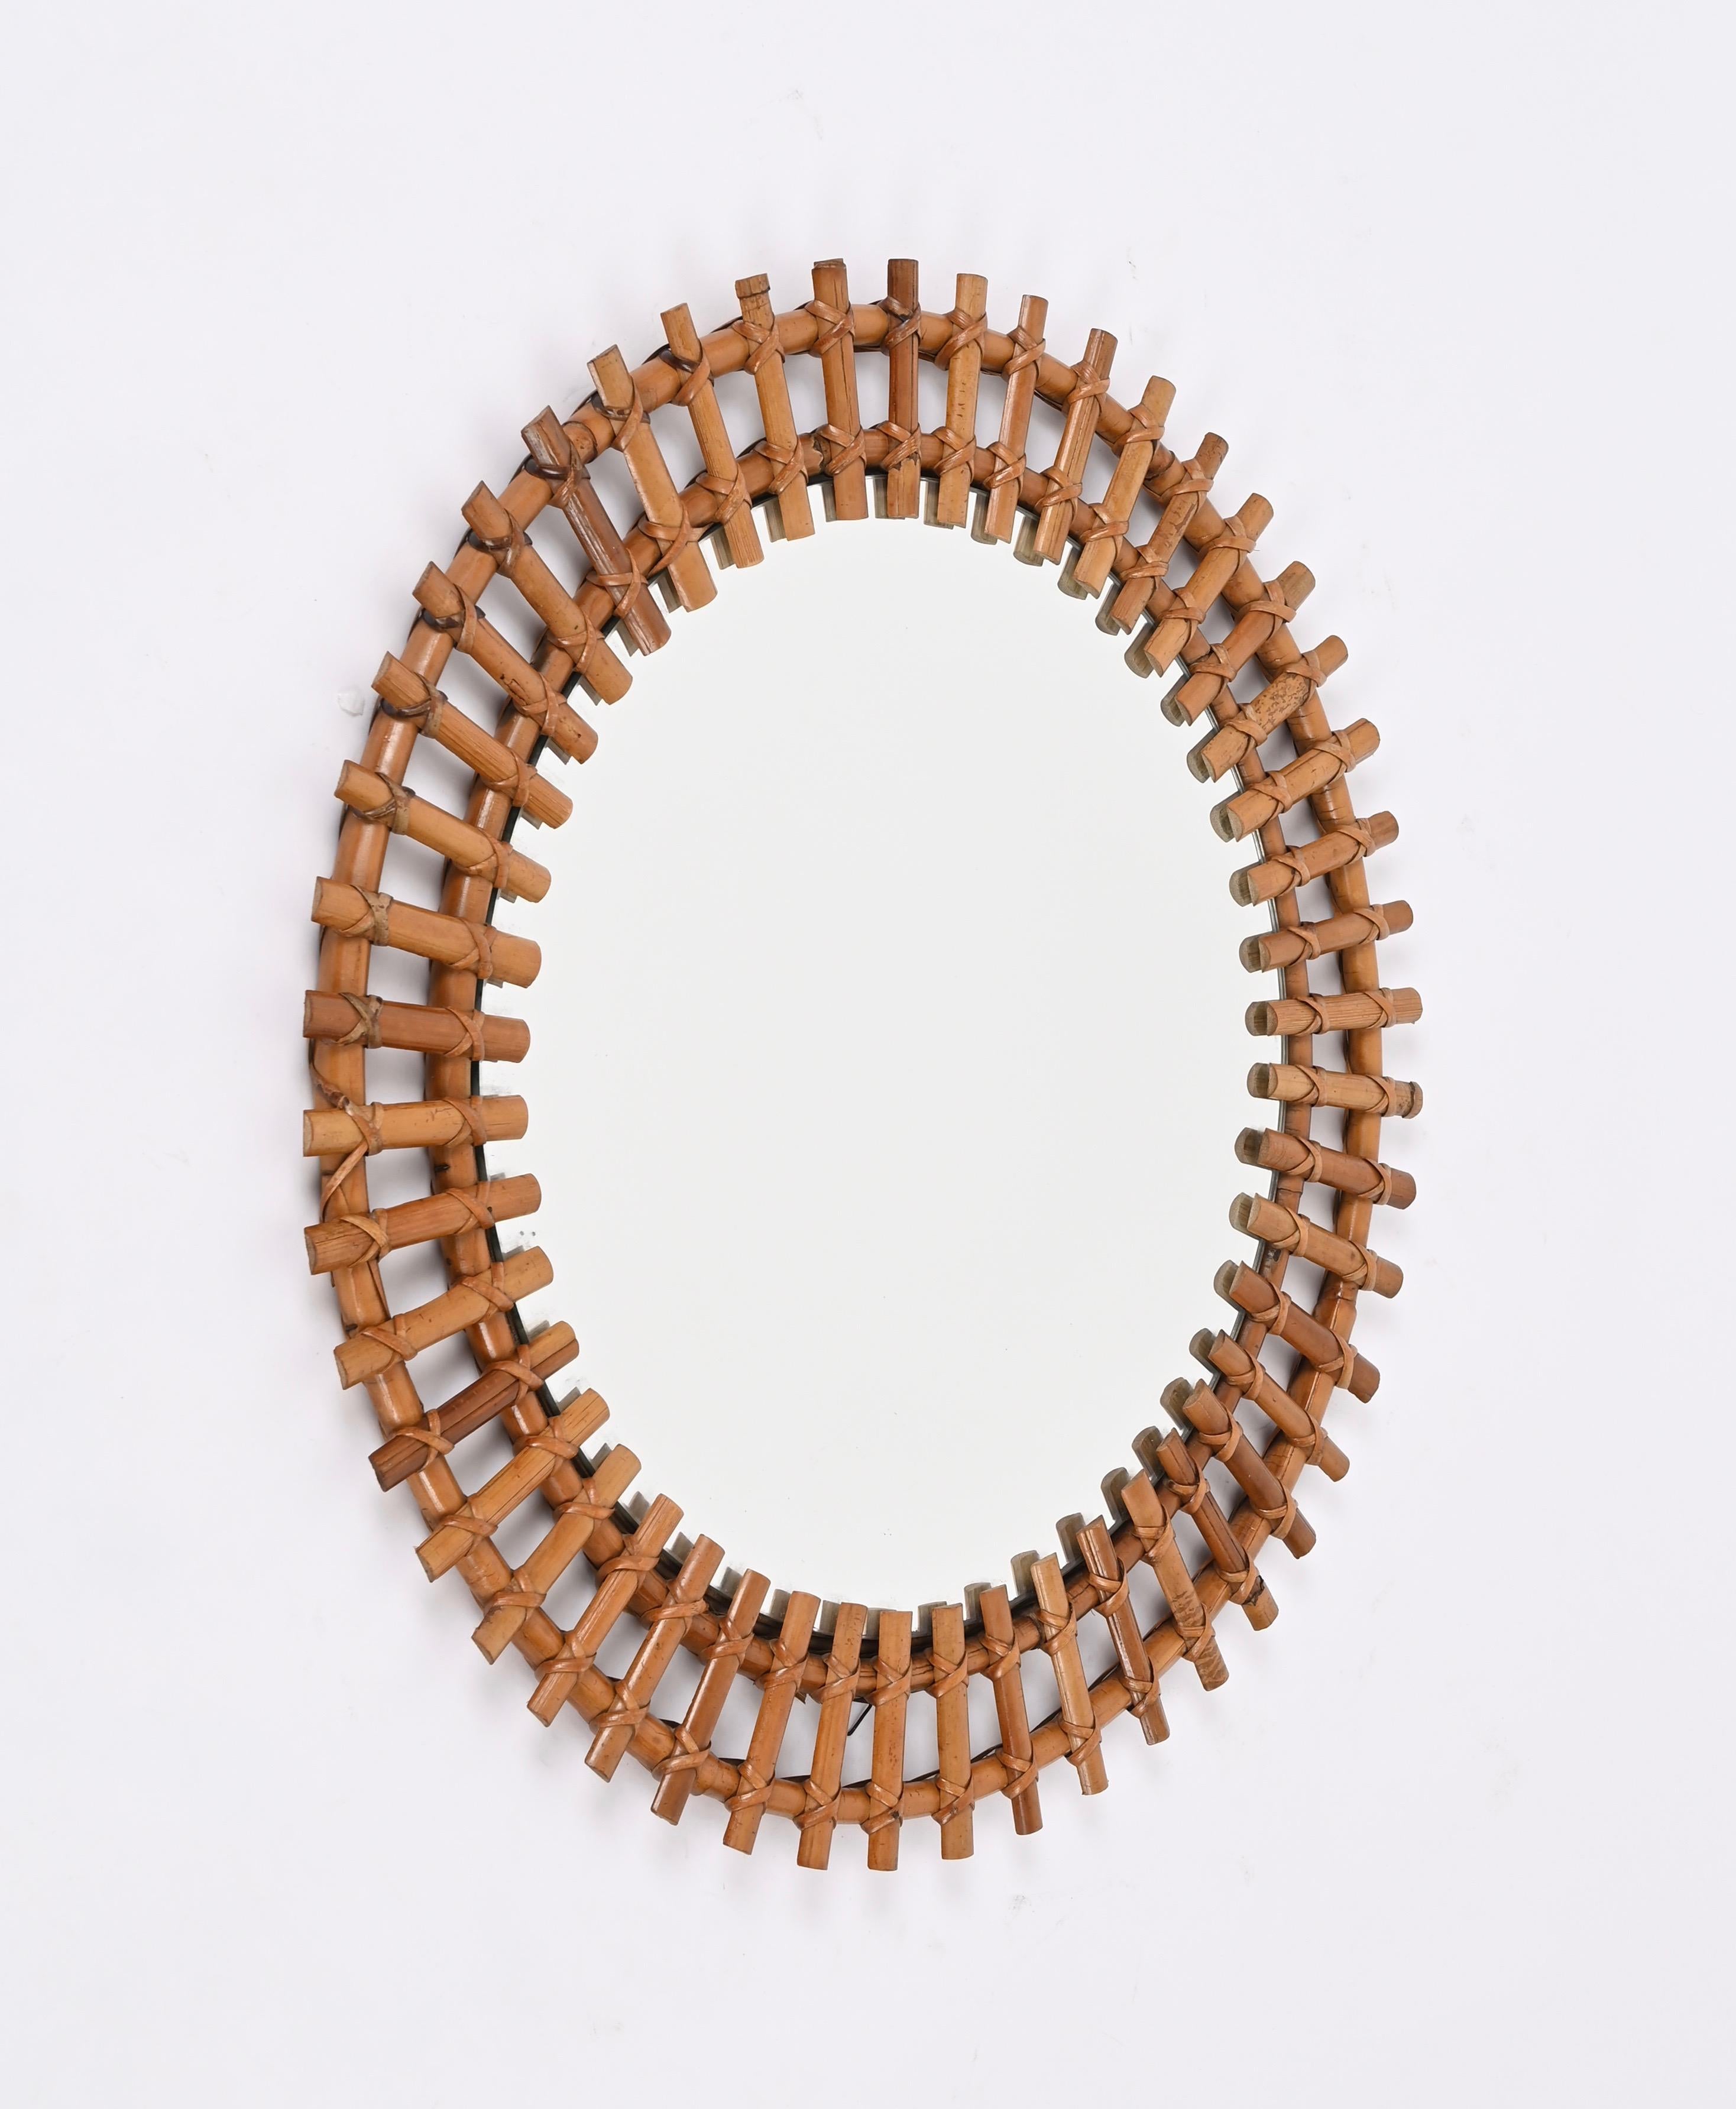 Spectacular mid-century French Riviera style round mirror in rattan, wicker and bamboo. This gorgeous piece was designed by Franco Albini and produced in in Italy during the 1970s.

This stunning mirror, fully hand-crafted with perfect proportions